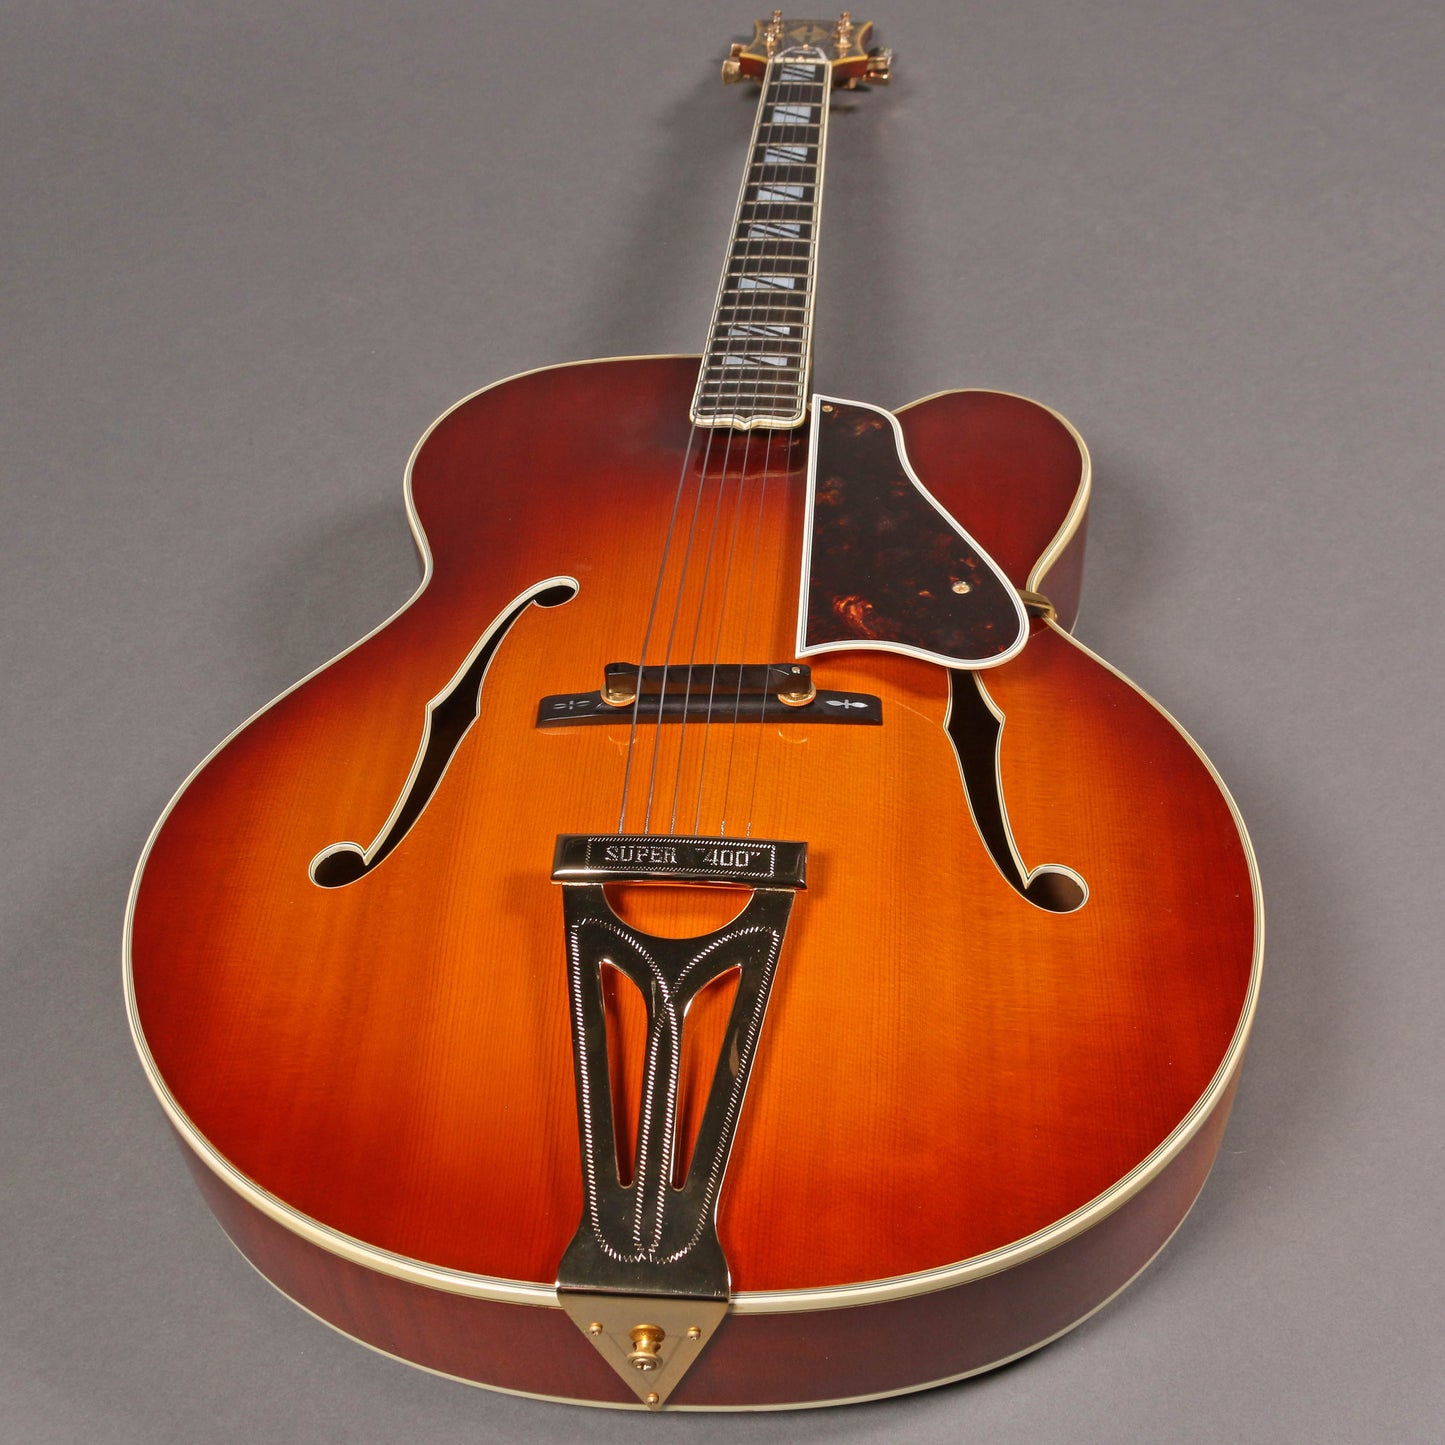 Early 70s Gibson Super 400C [*Kalamazoo Collection]